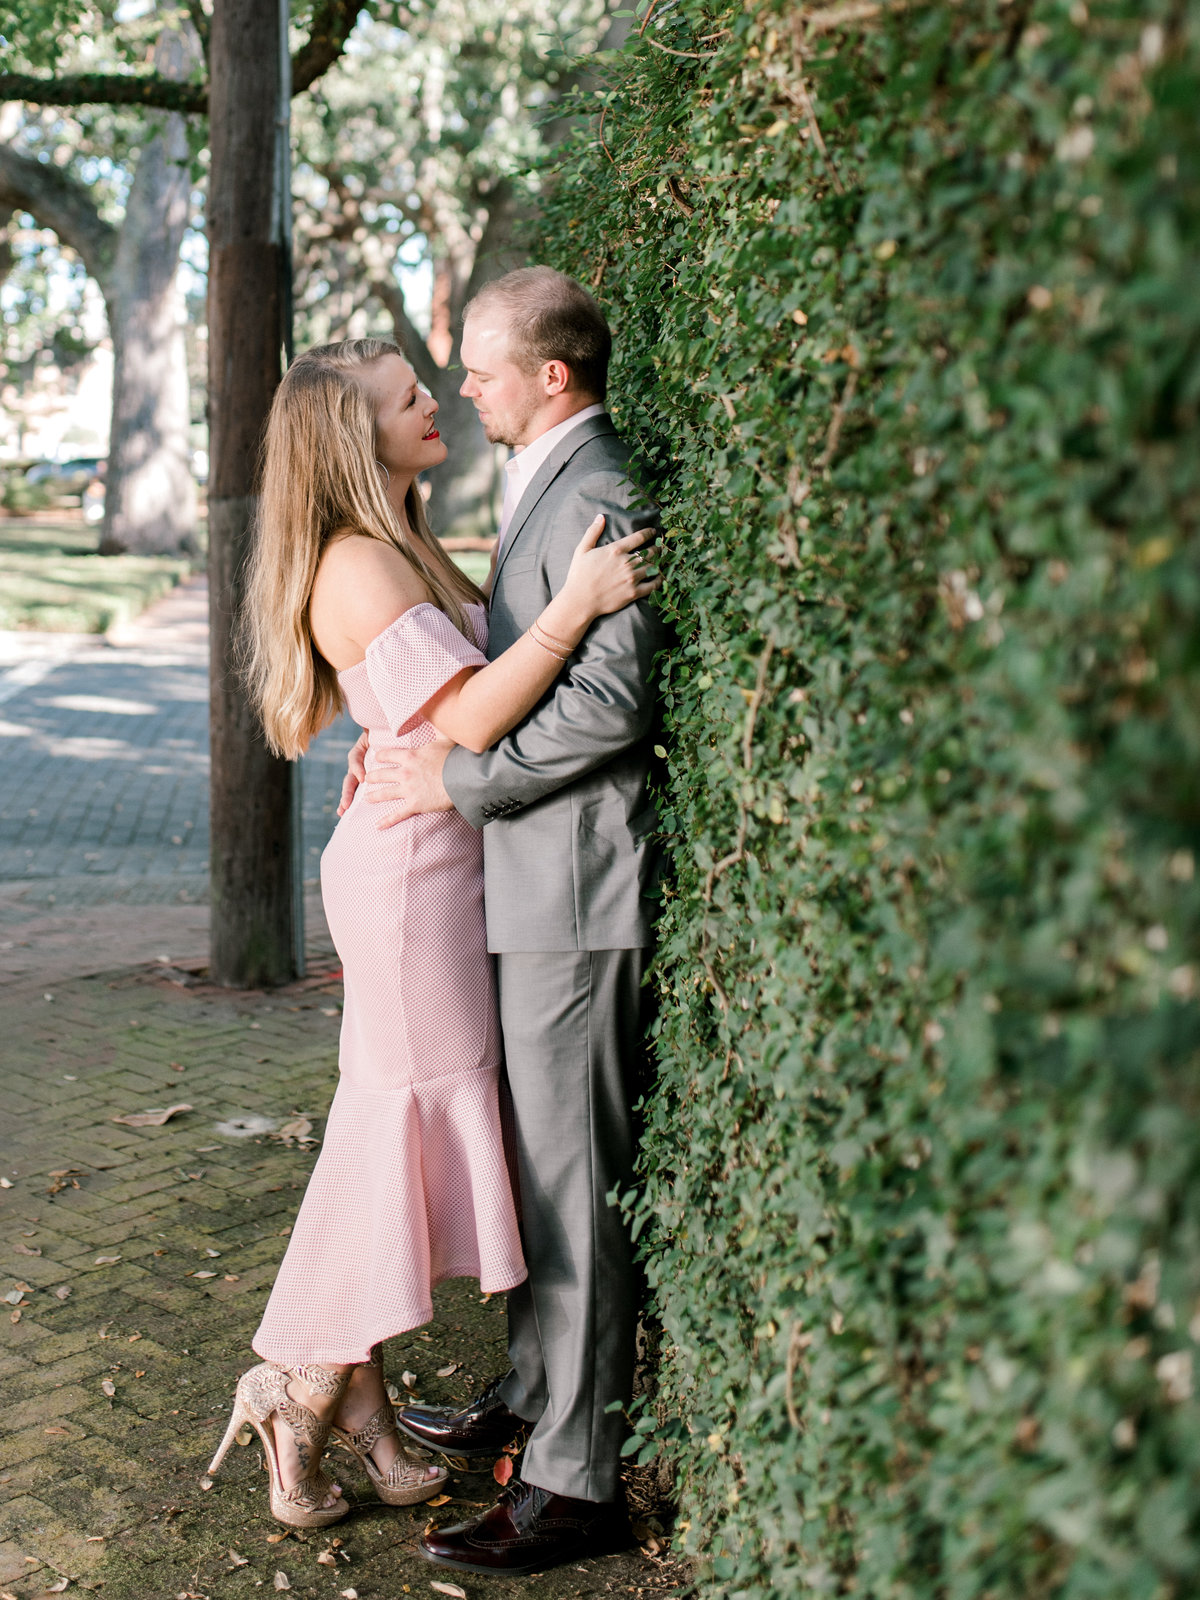 Couple leans against Ivy wall